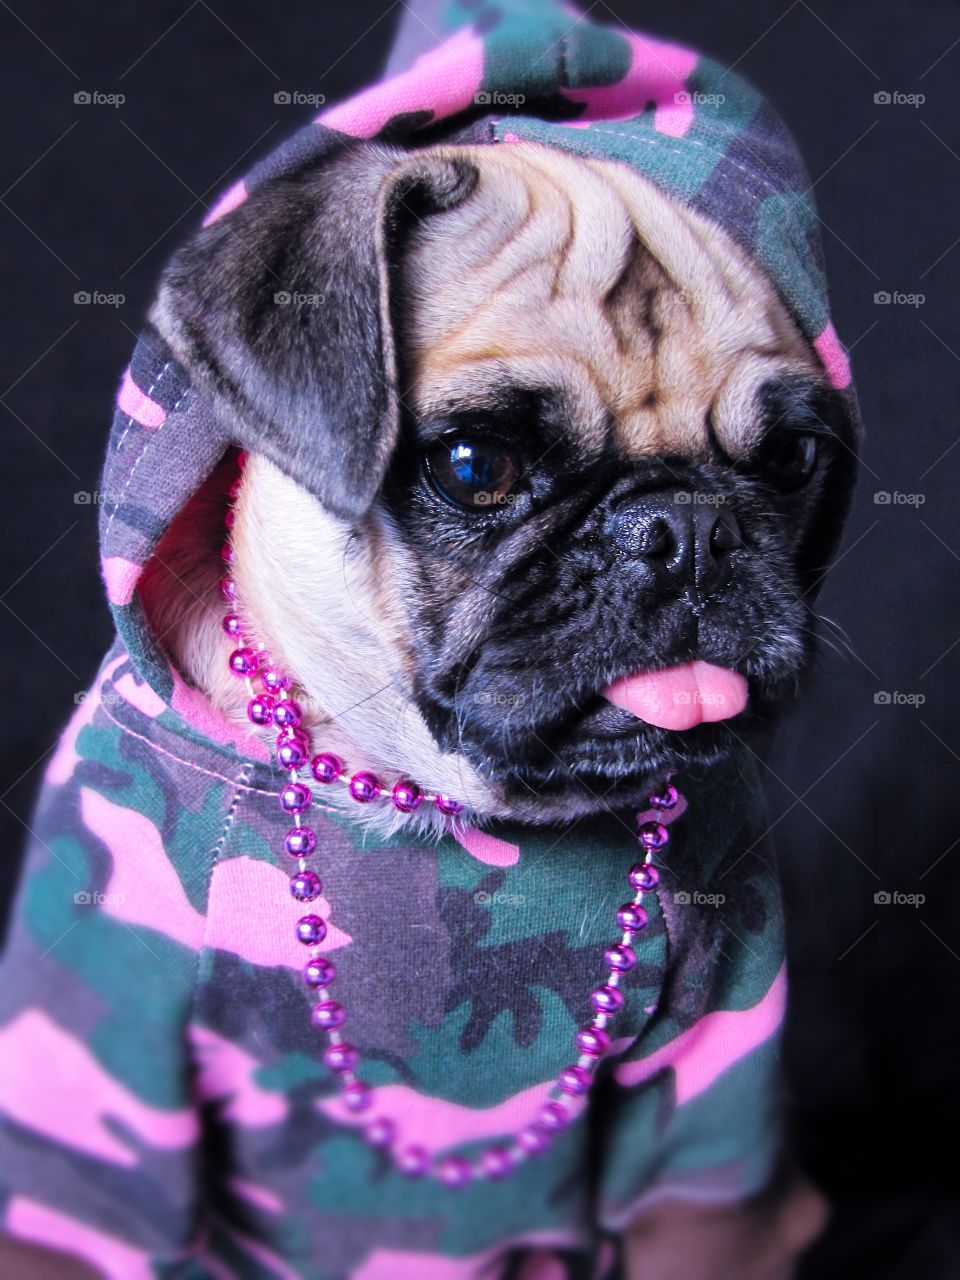 Studio shot of pug wearing cloths and necklace